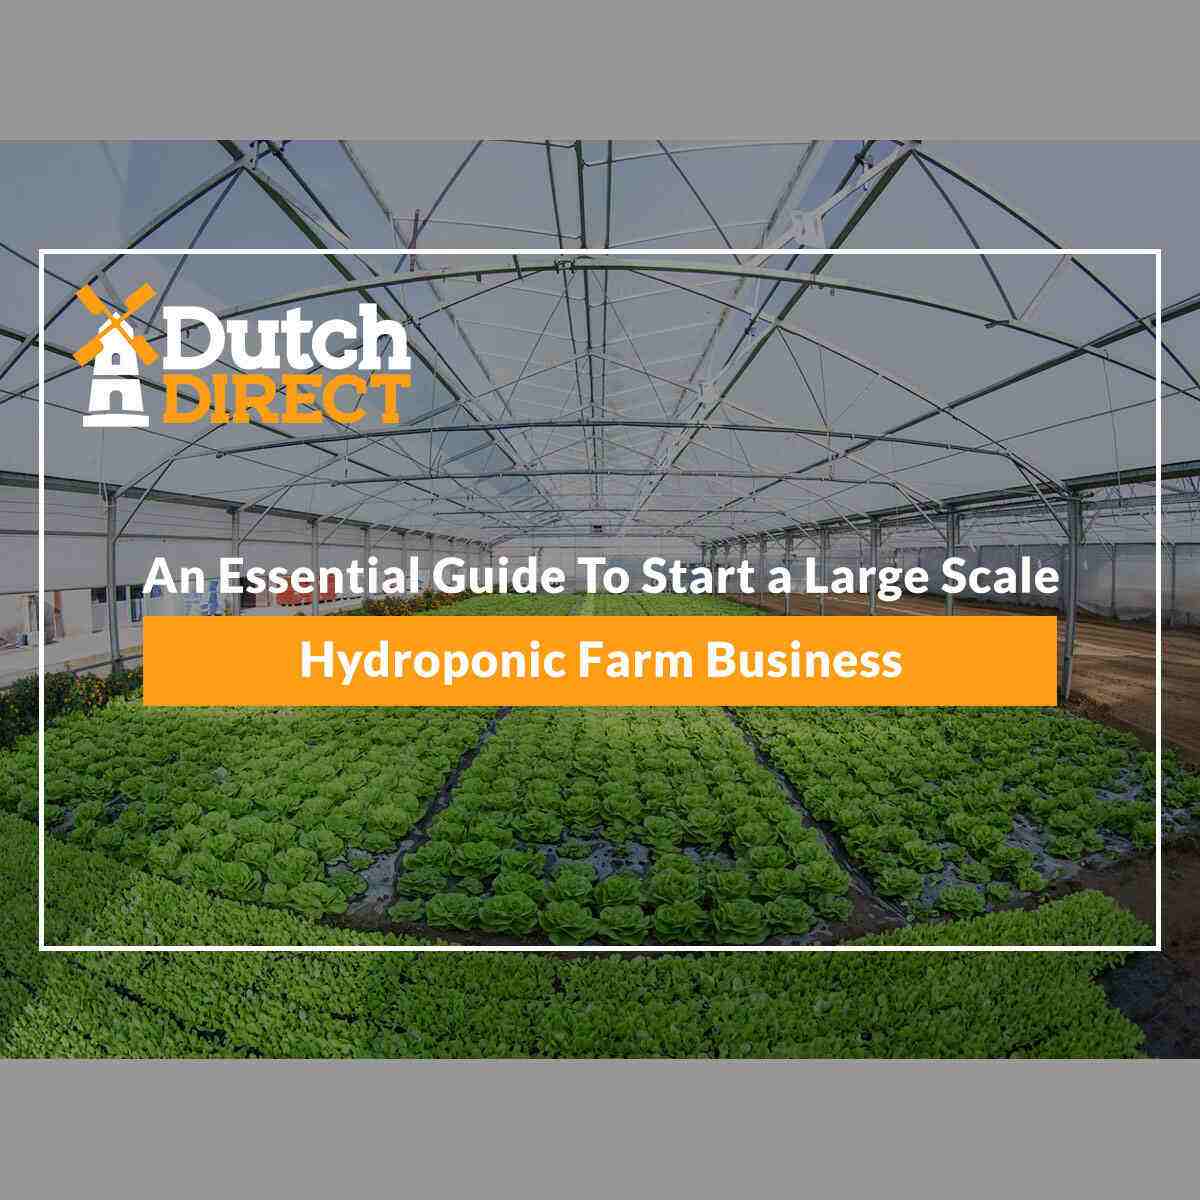 An Essential Guide To Start a Large Scale Hydroponic Farm Business